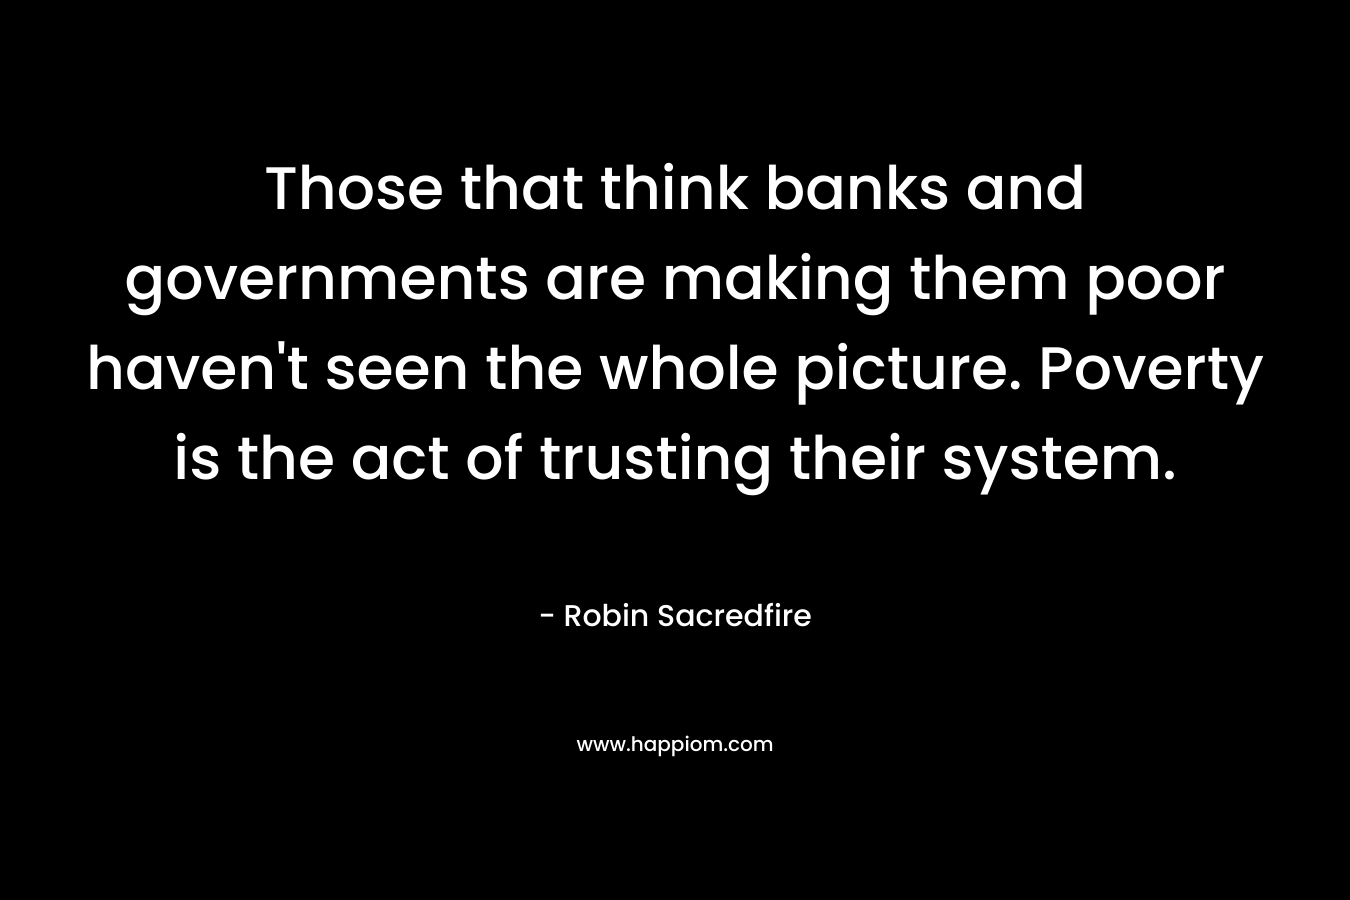 Those that think banks and governments are making them poor haven't seen the whole picture. Poverty is the act of trusting their system.